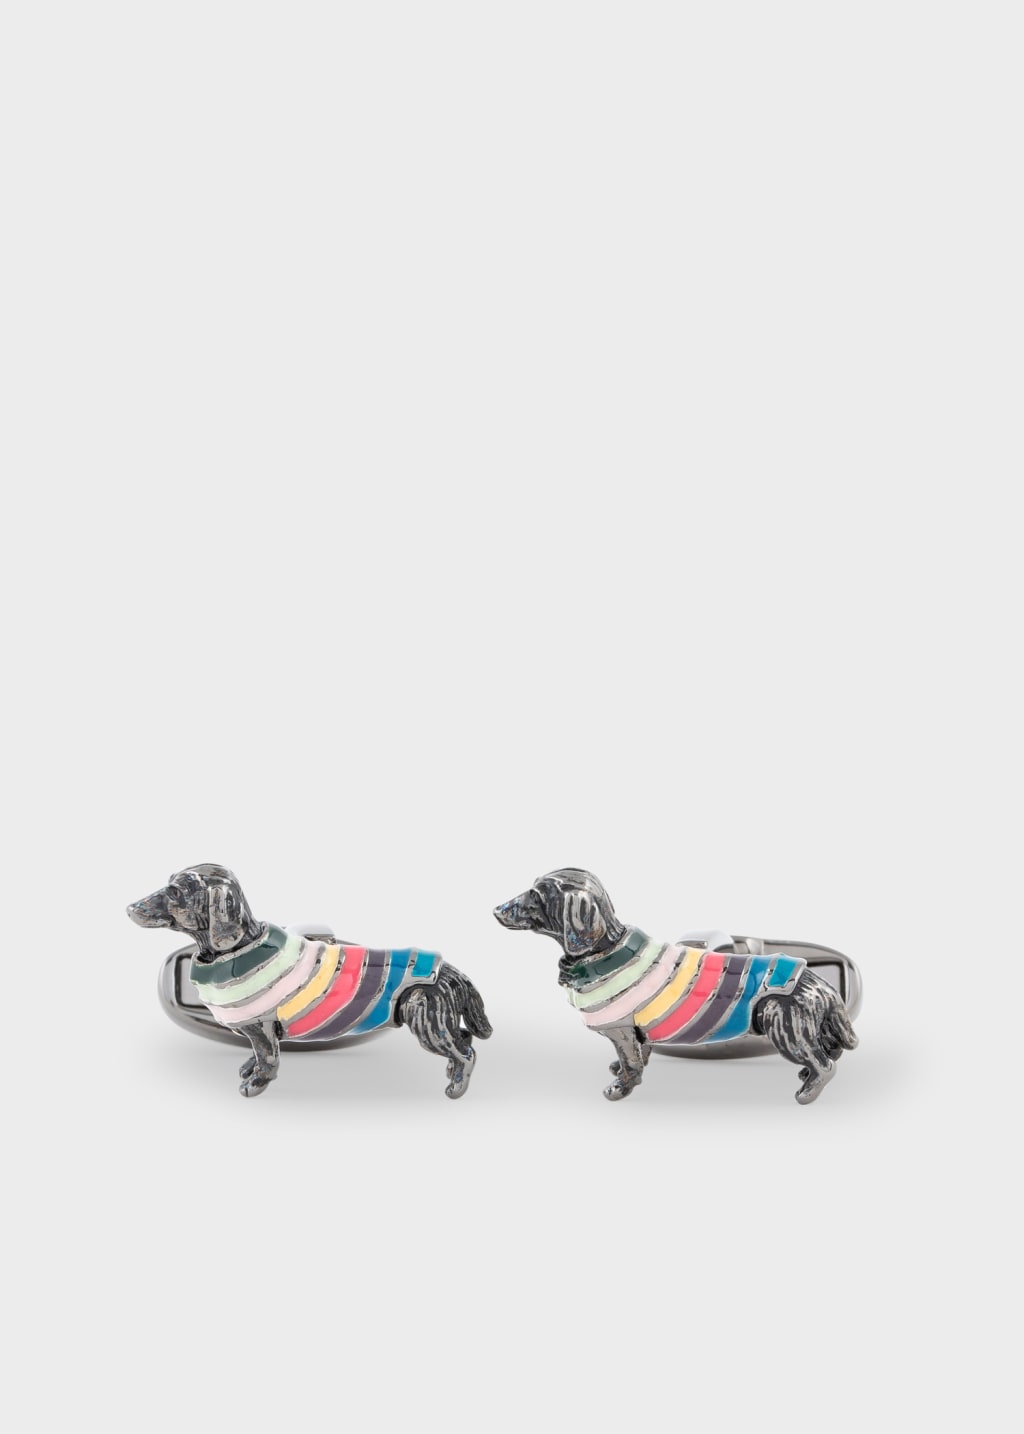 Front View - Silver 'Dog In Jumper' Cufflinks Paul Smith